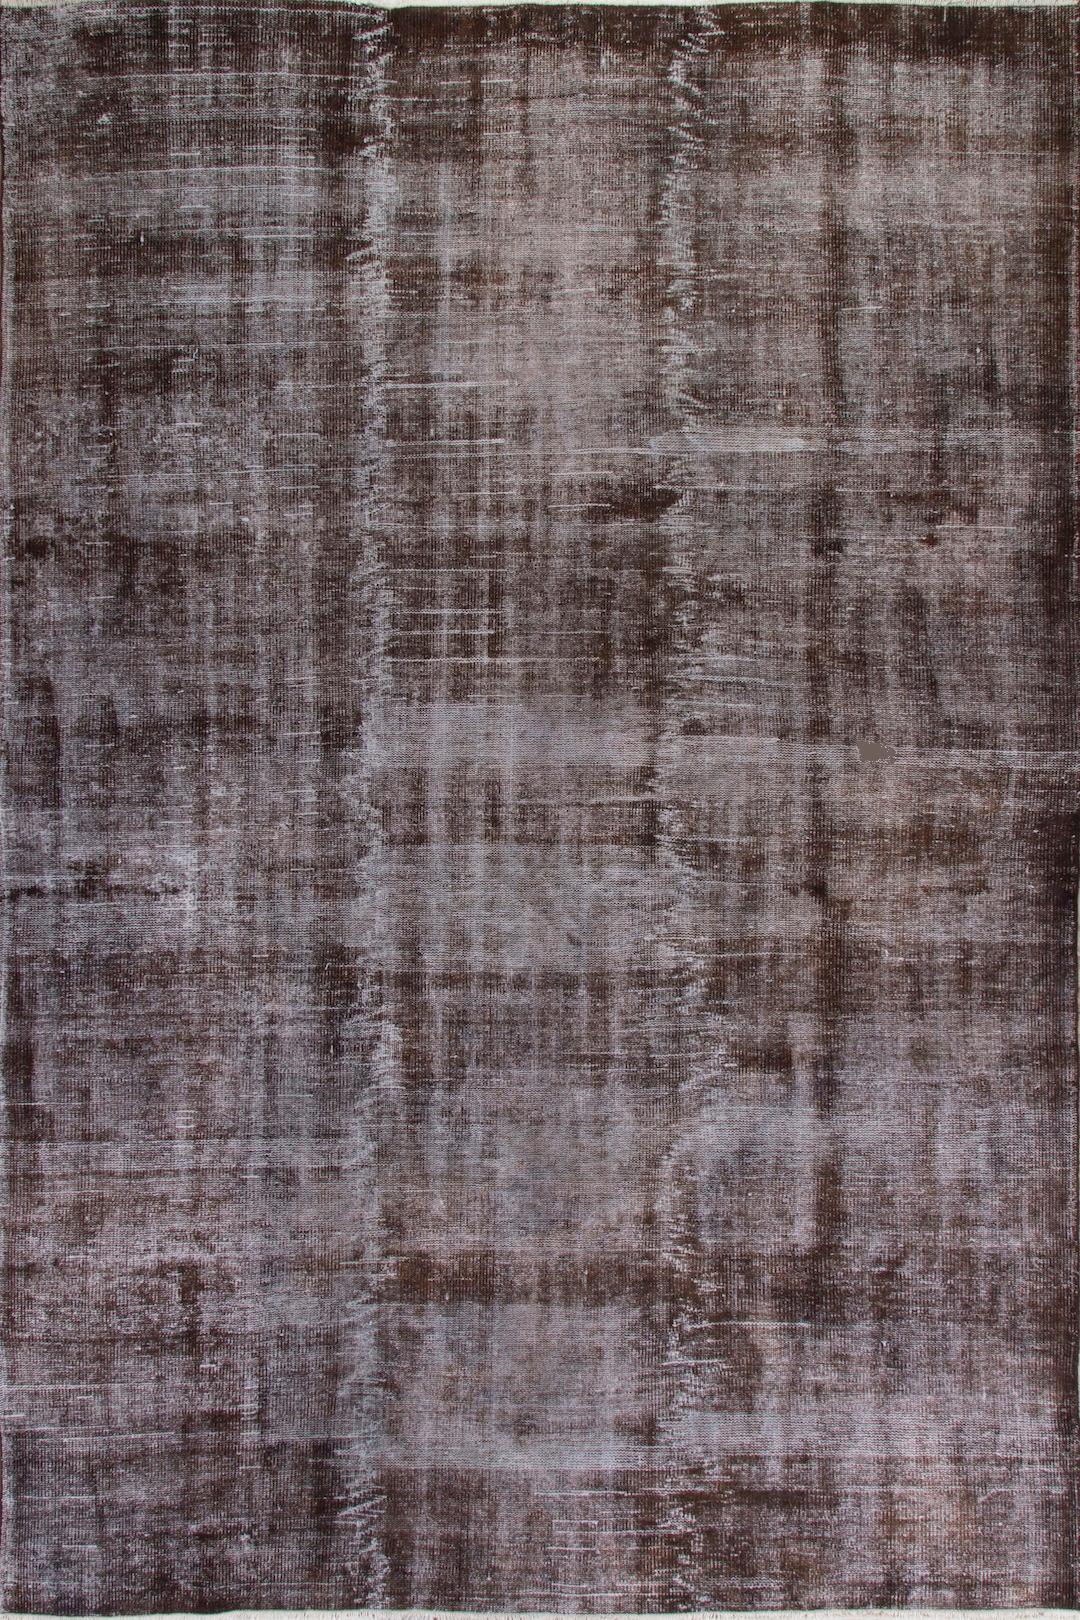 6.8x10.2 Ft Distressed Mid-20th Century Handmade Anatolian Rug Re-Dyed in Brown For Sale 6